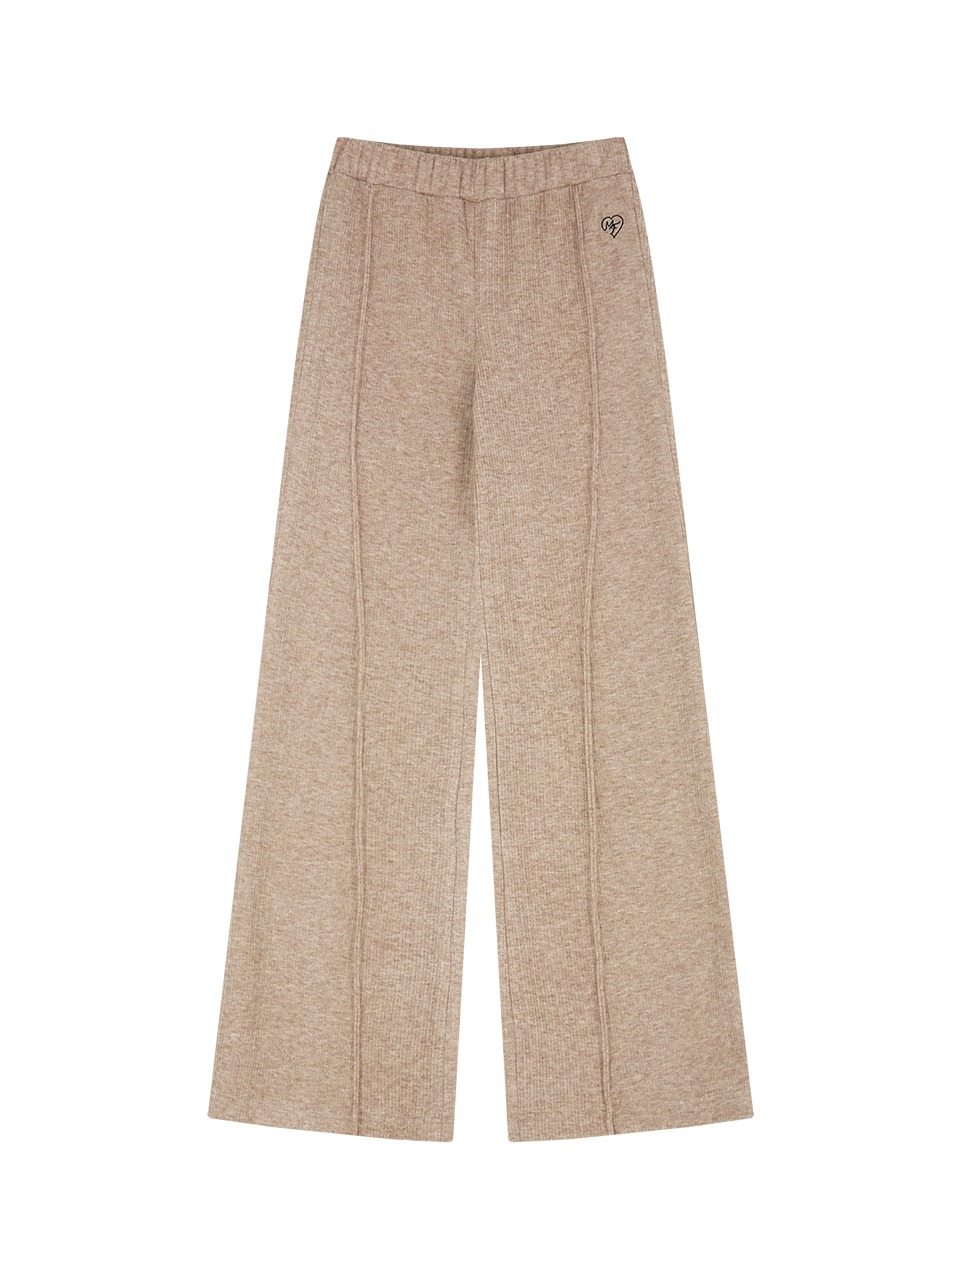 MAFING FLARE PANTS (BROWN)